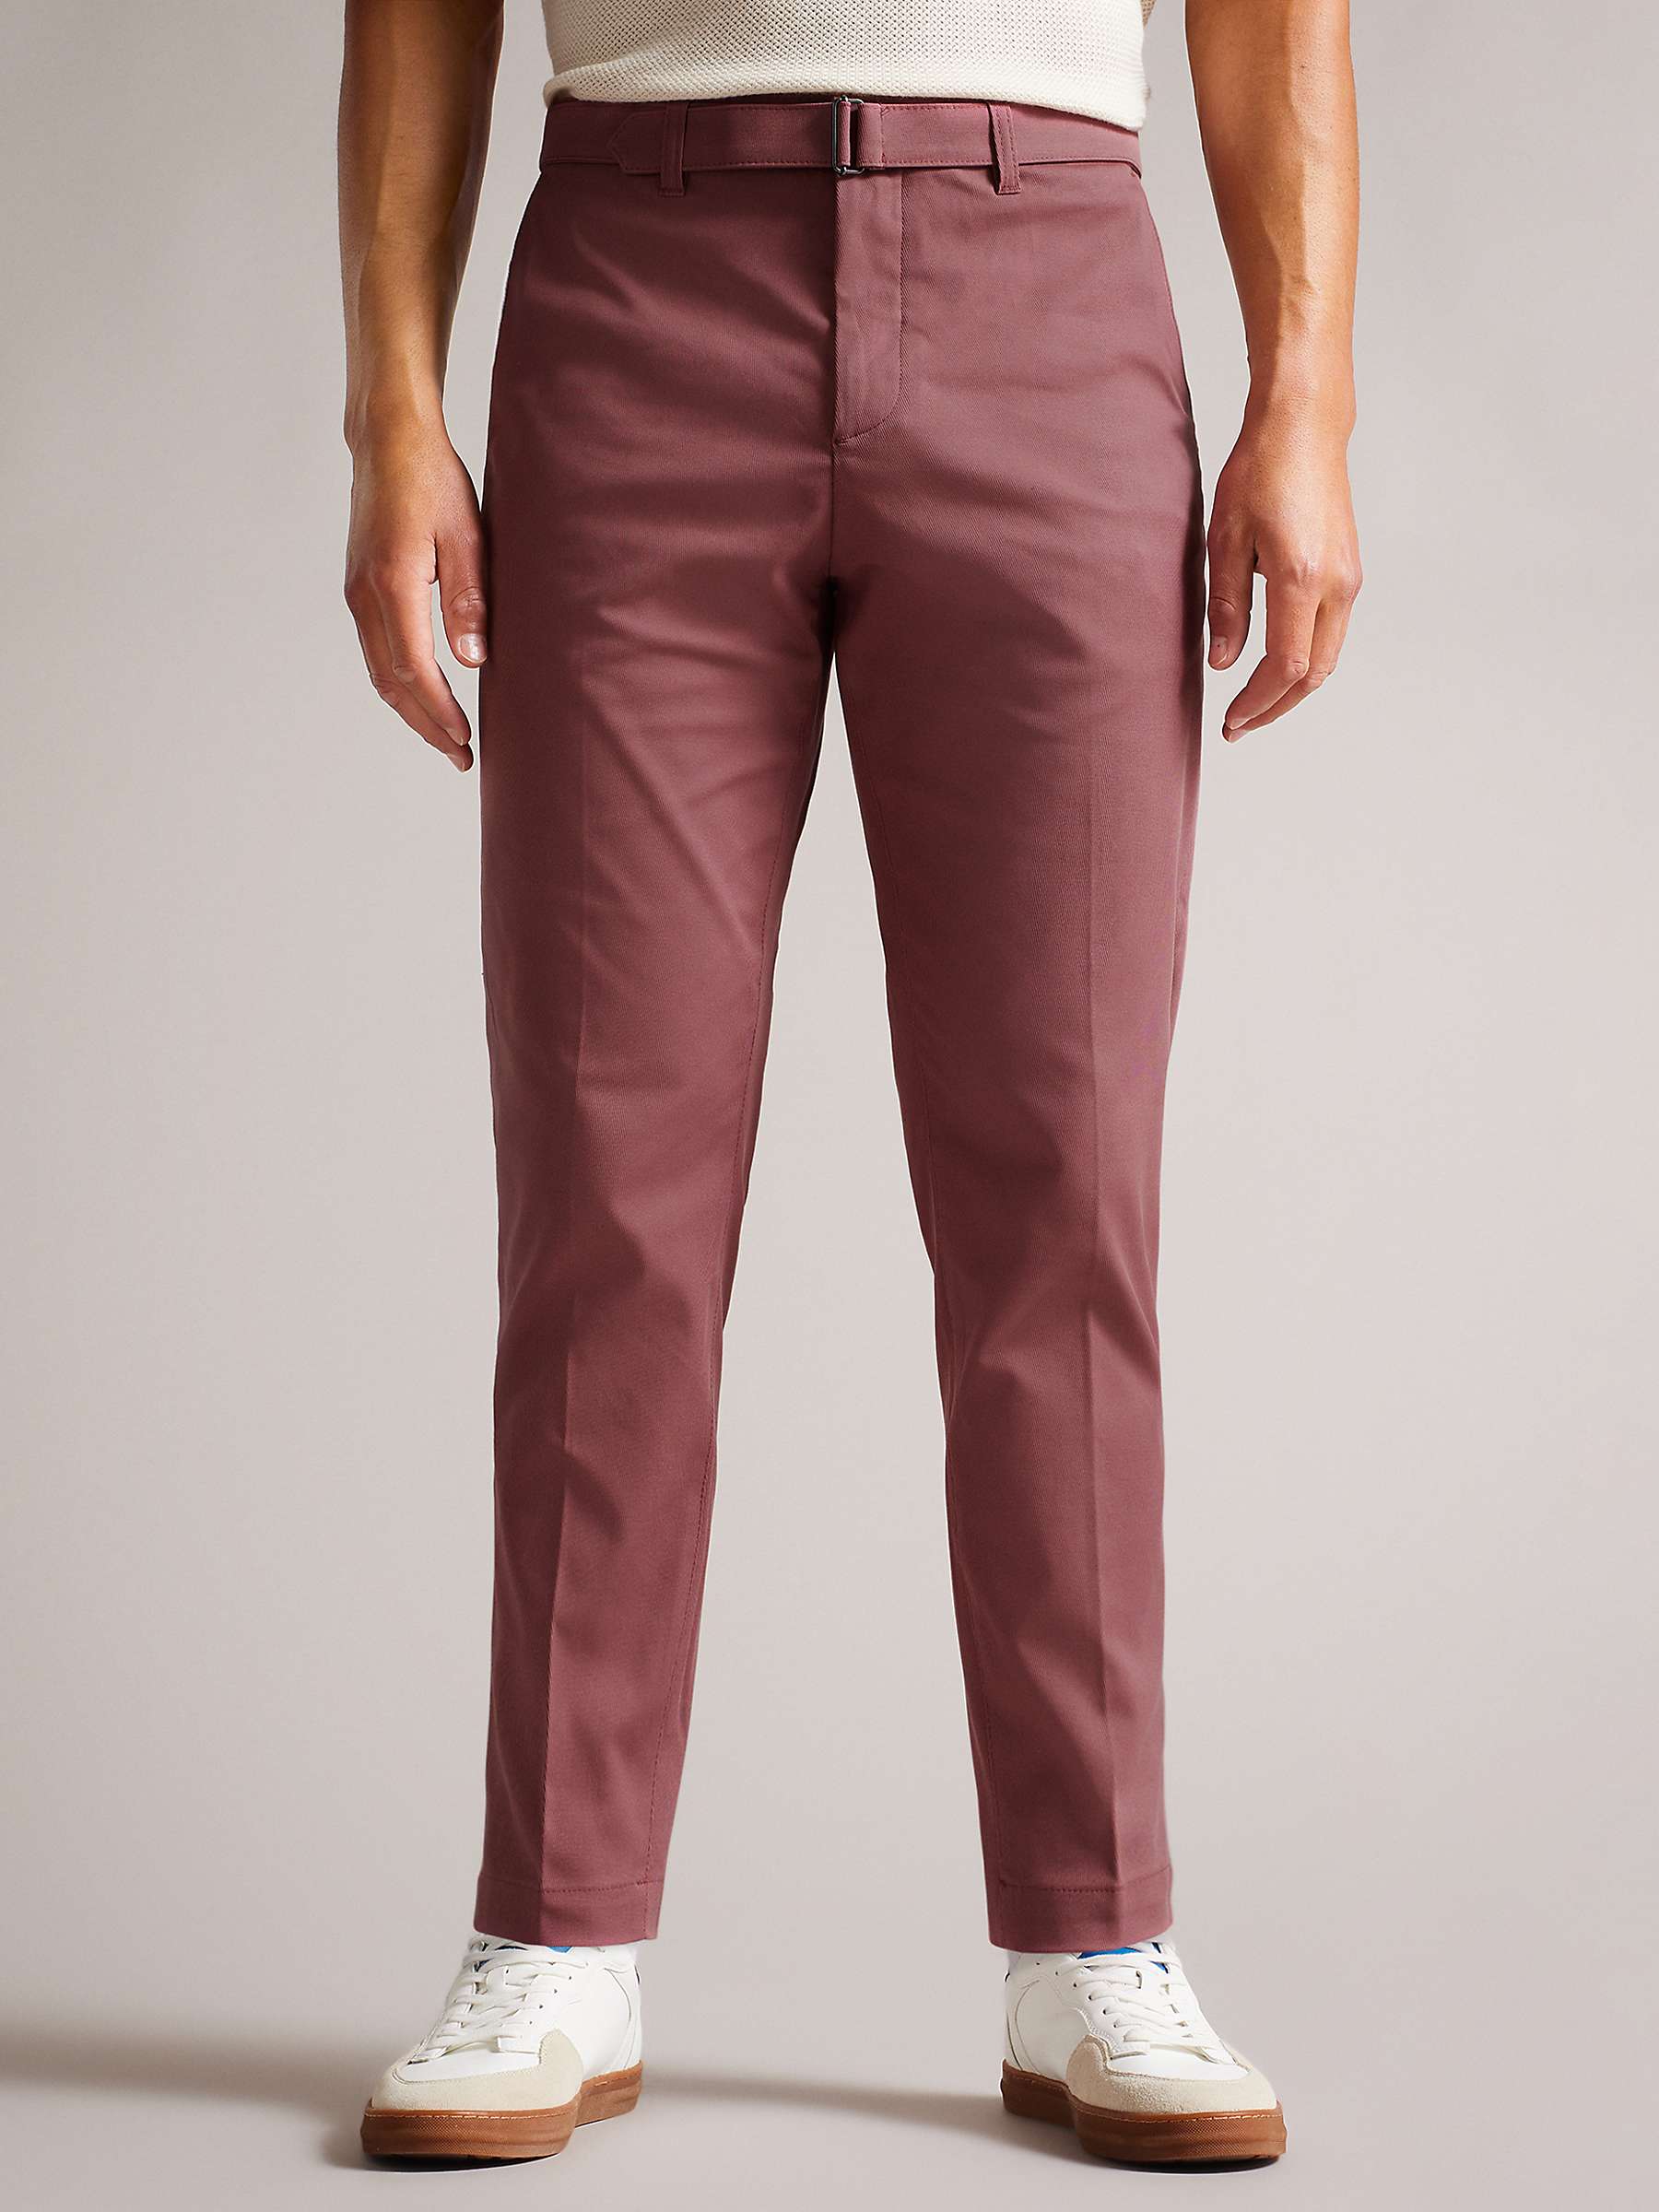 Buy Ted Baker Quarts Belted Straight Leg Trousers Online at johnlewis.com